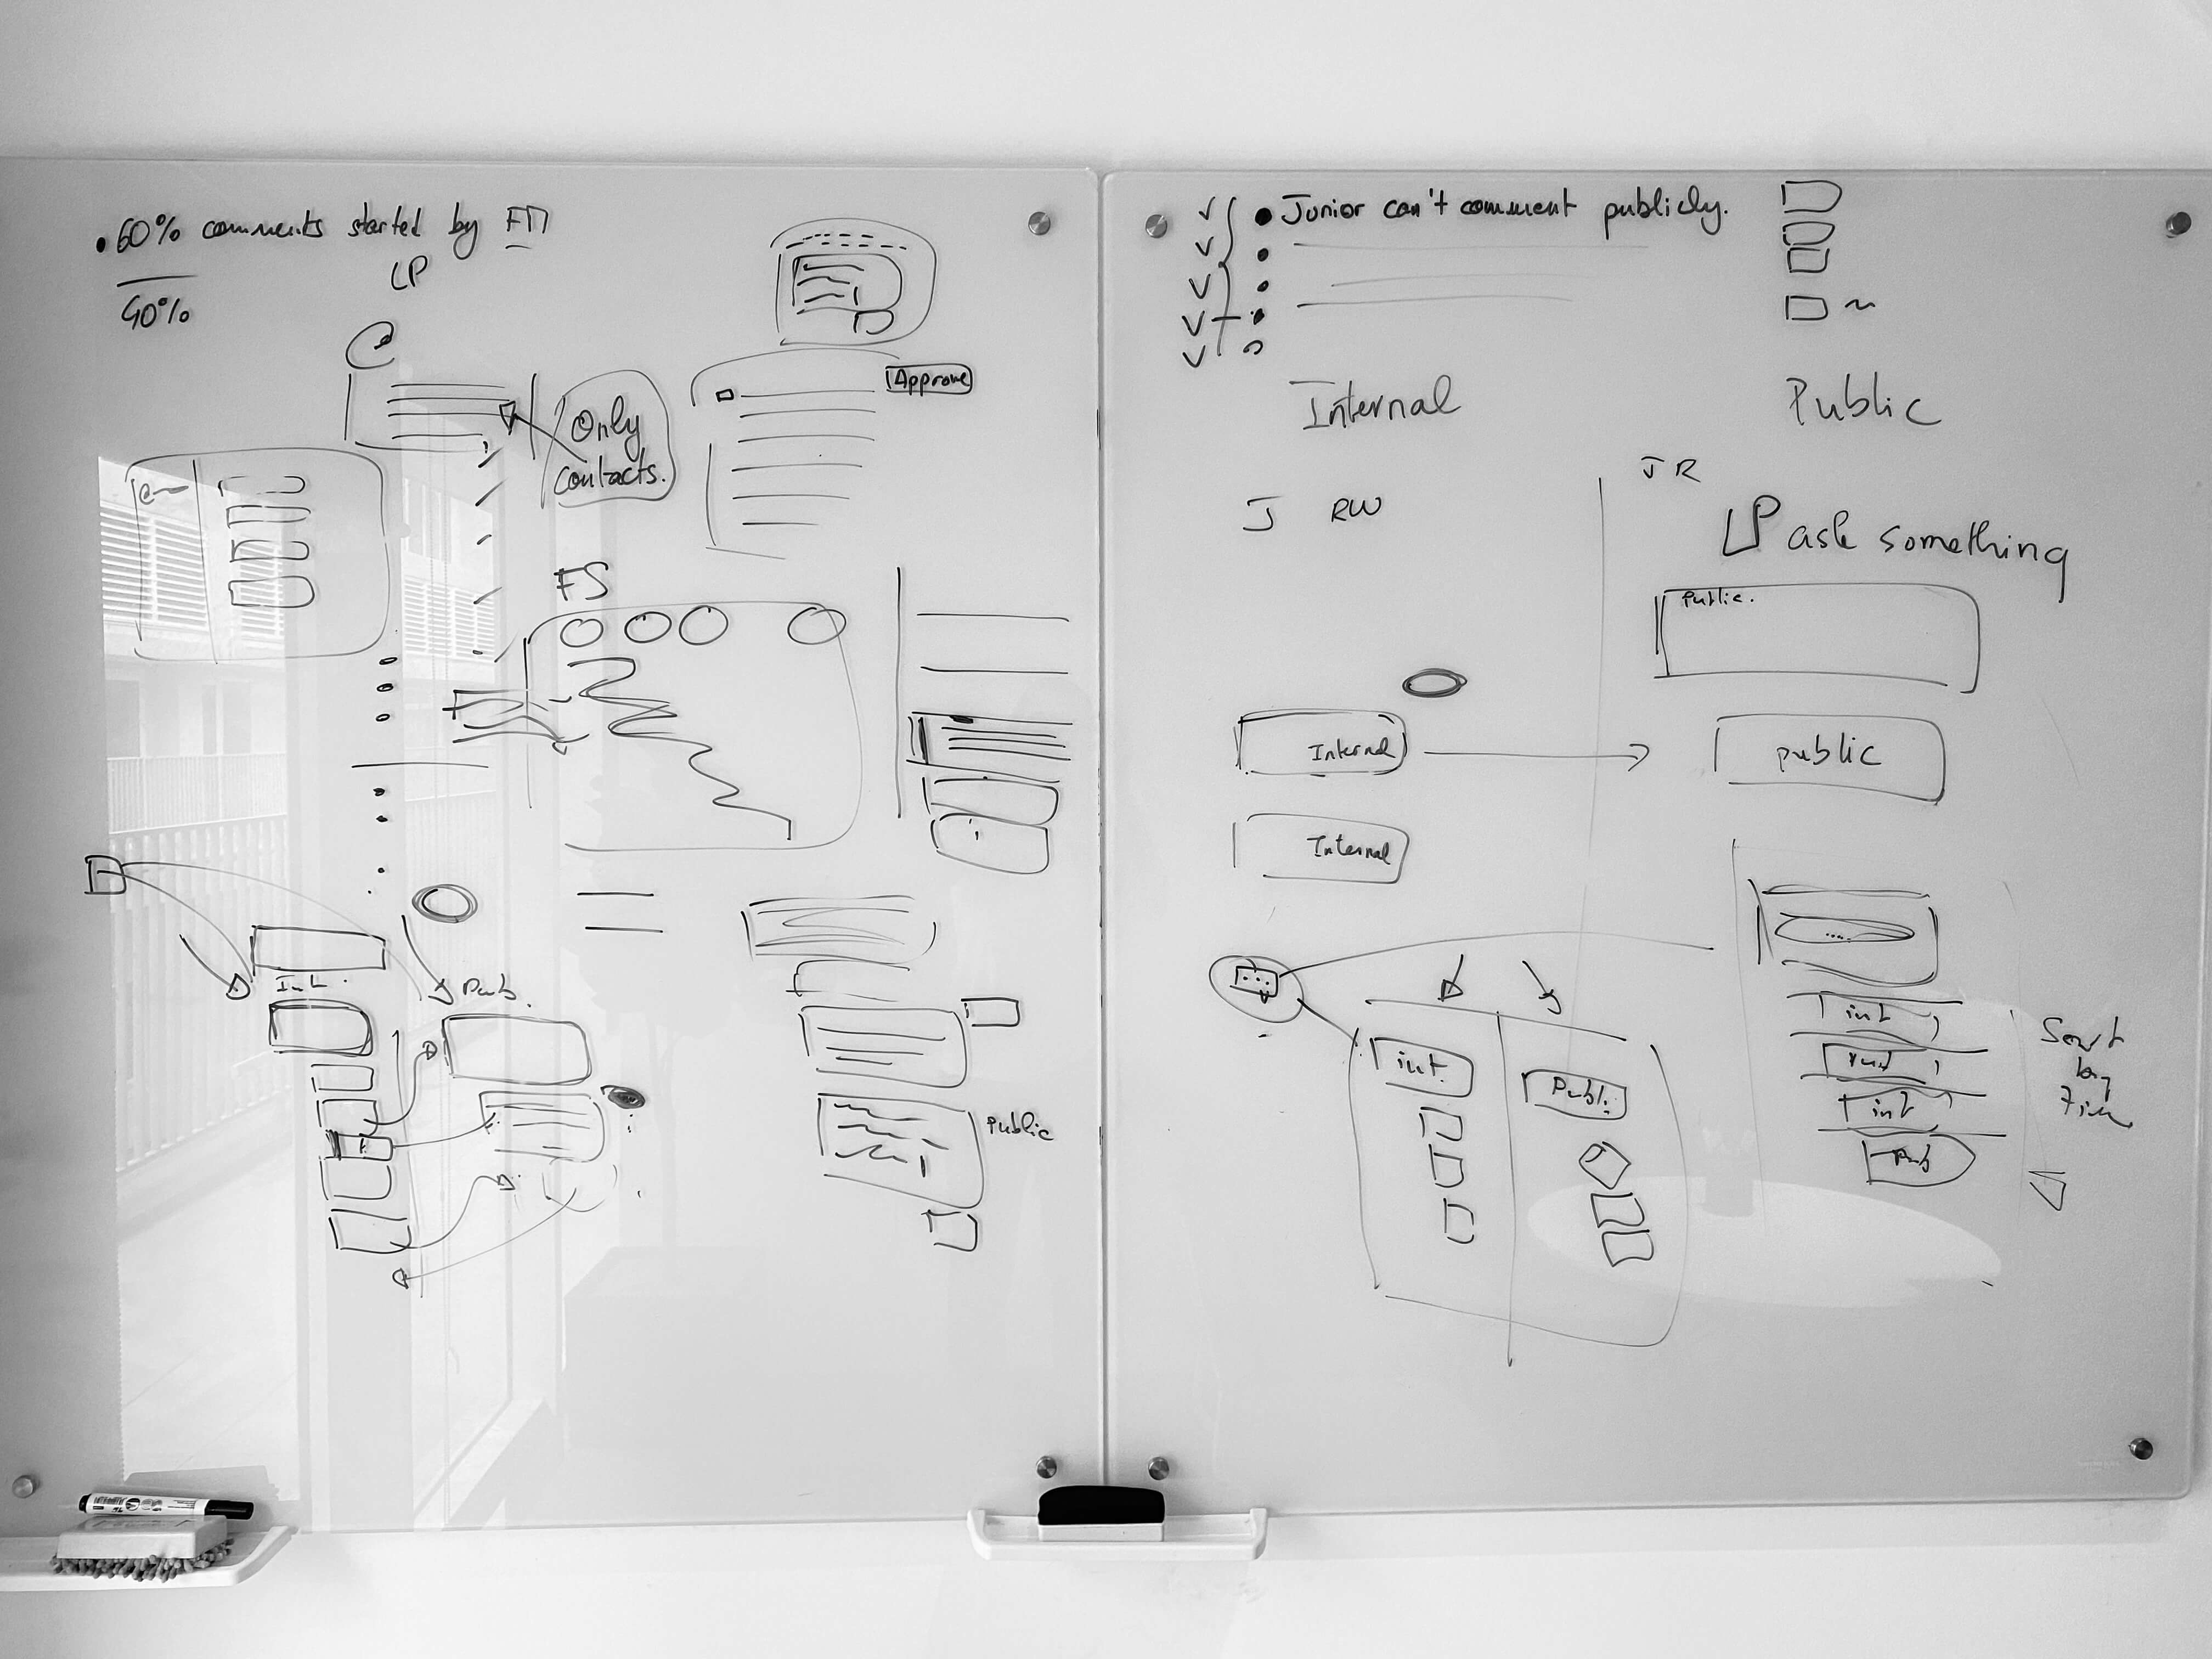 Mapping out different user flows on a whiteboard